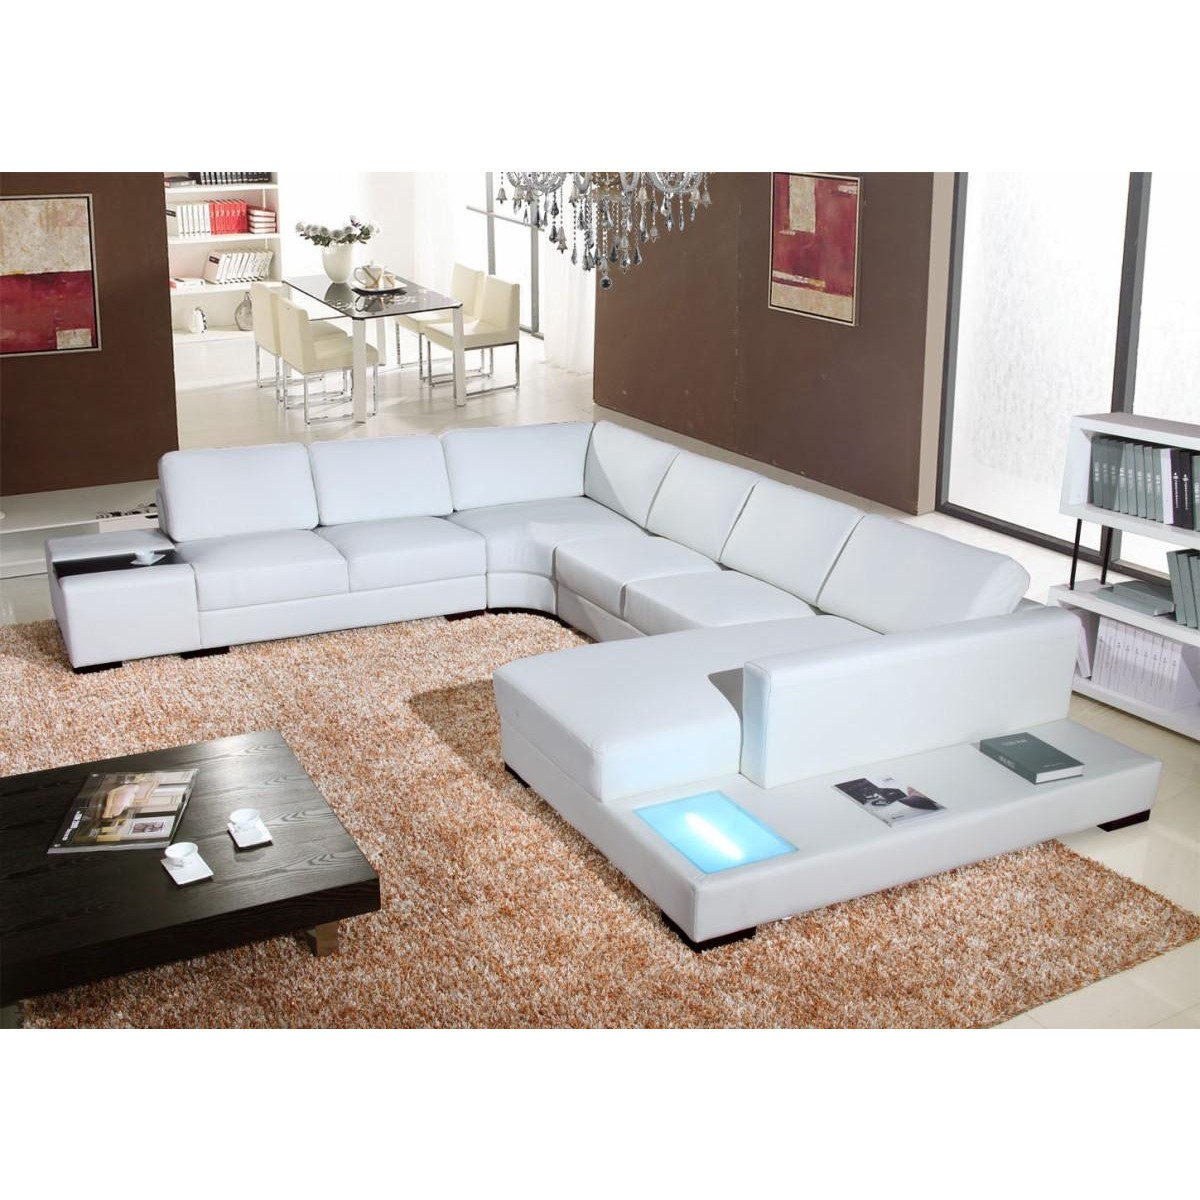 Modern Bonded Leather Sectional Sofa, Modern White Leather Sectional With Chaise